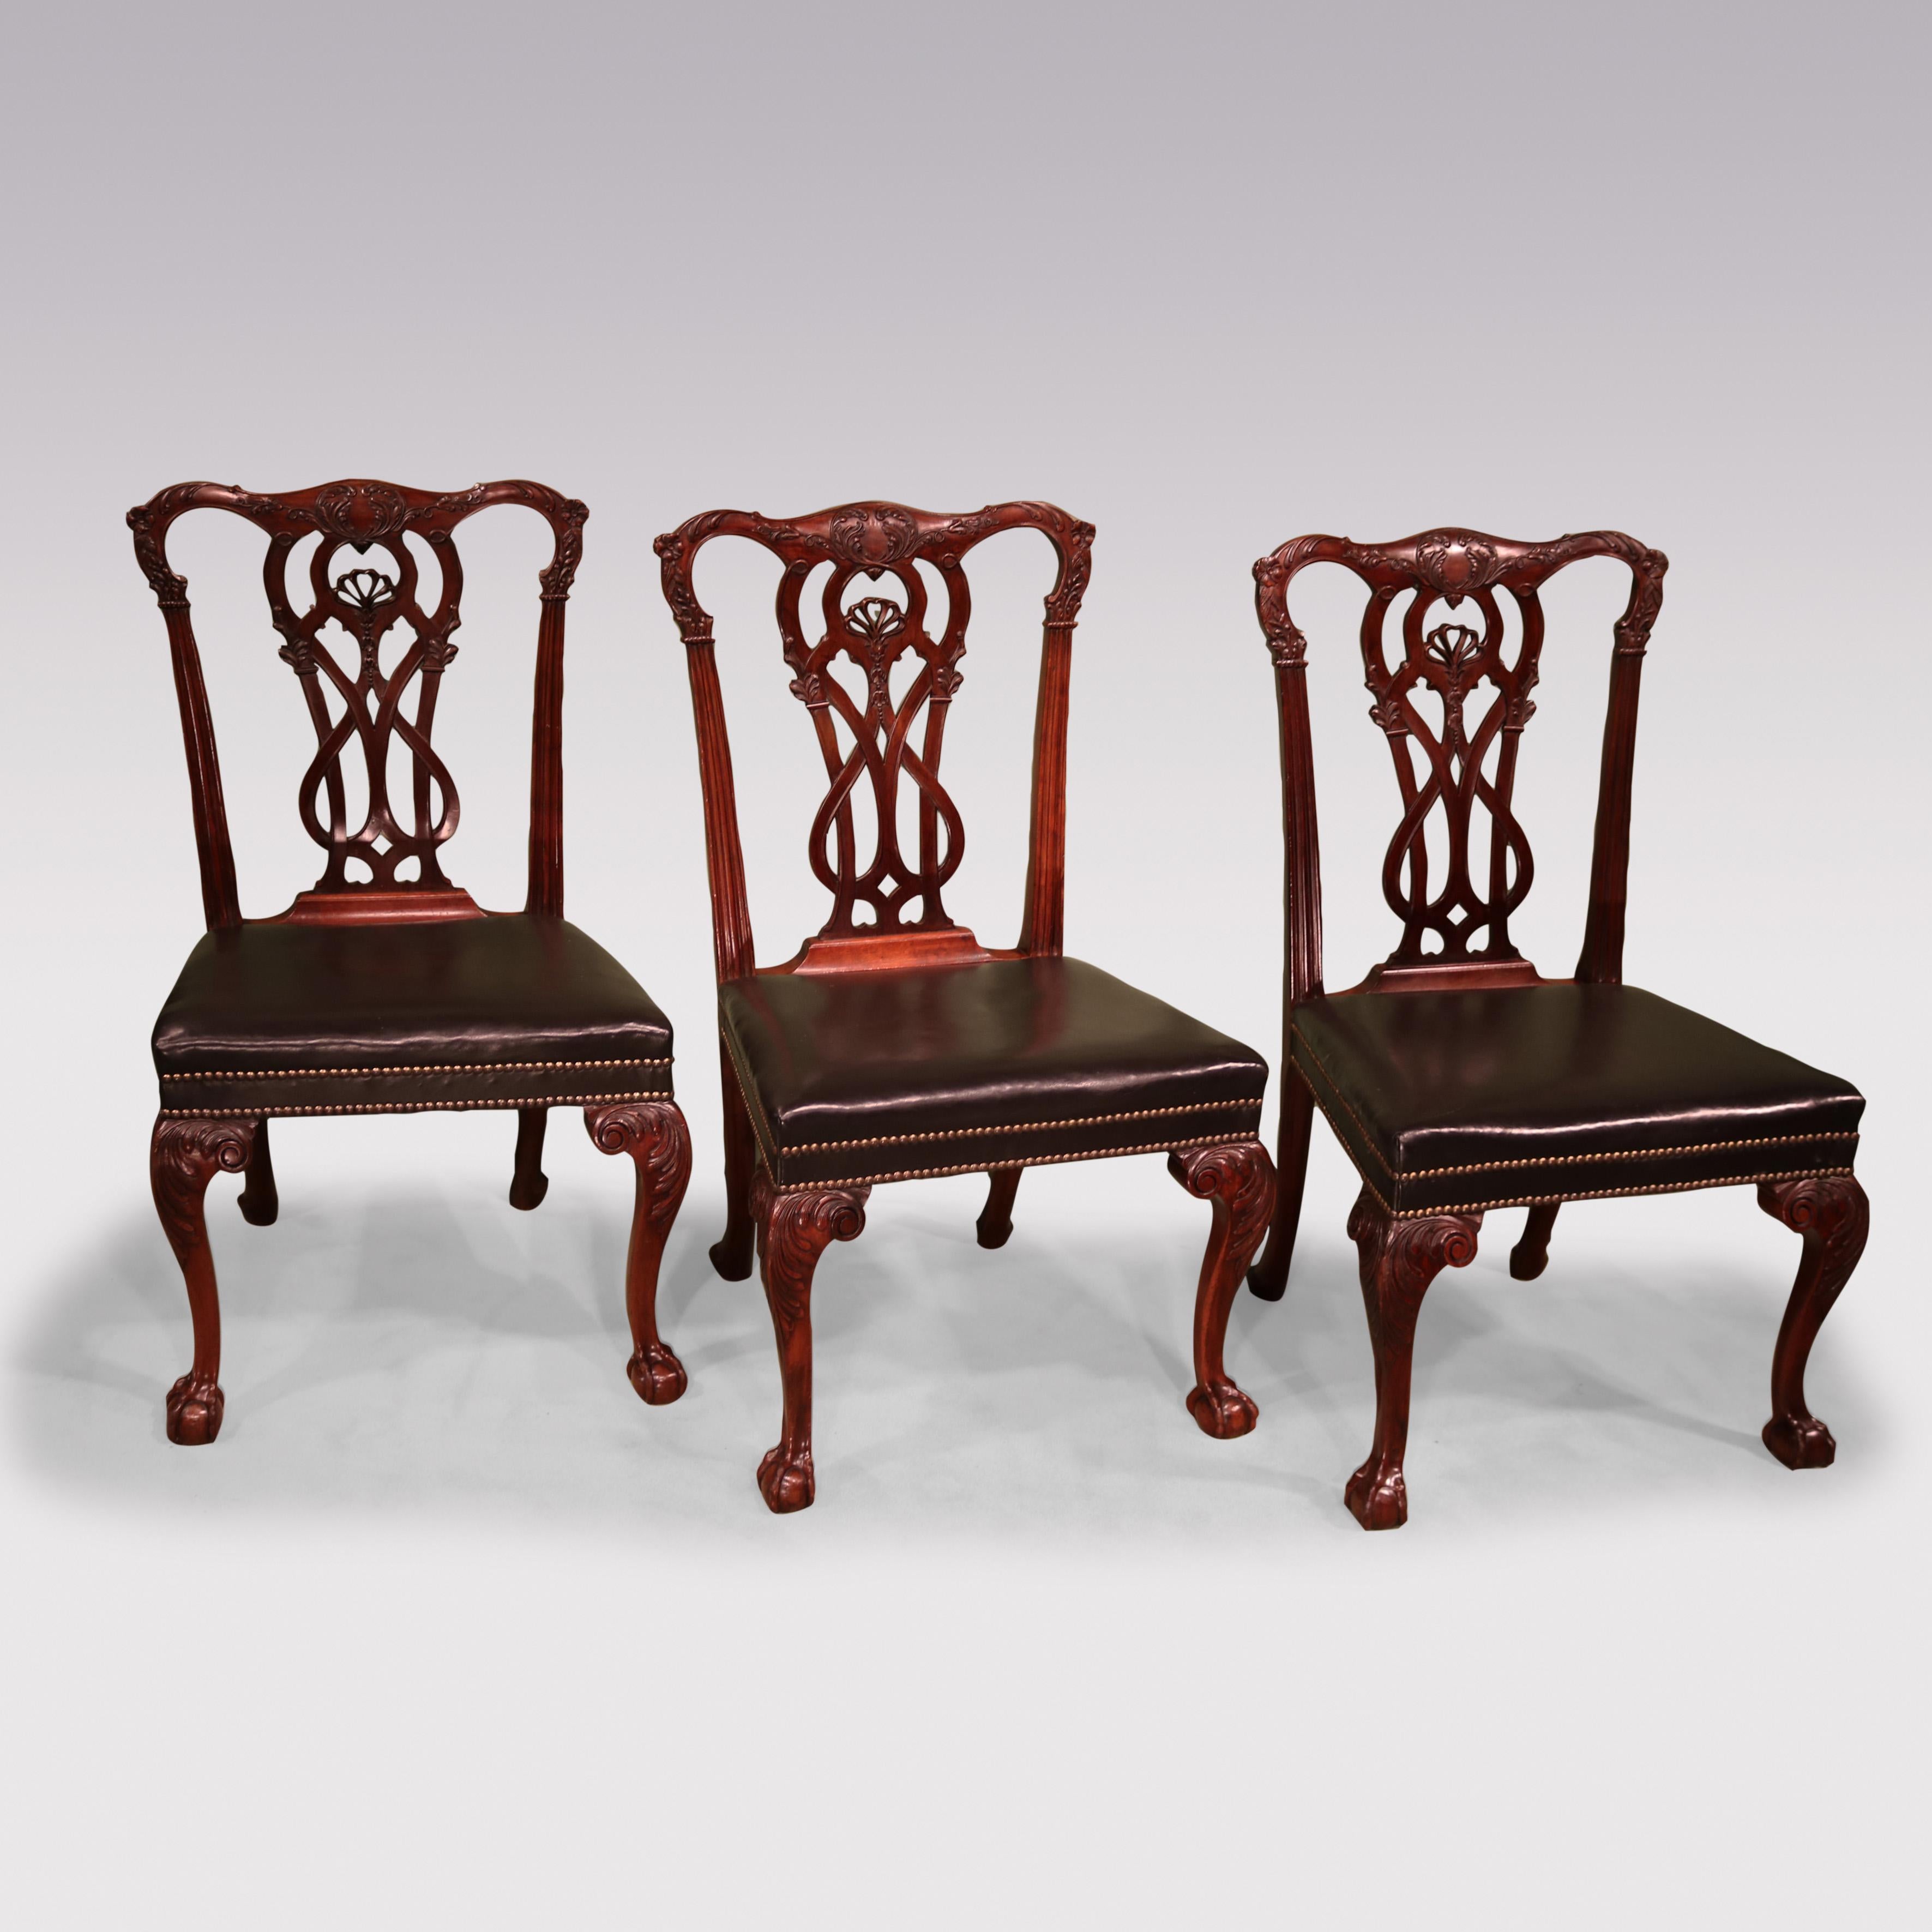 A fine quality set of 6 single and 2 arm Chippendale revival Mahogany Dining Chairs, acanthus carved throughout having shaped top rail above interlaced splats with honeysuckle detail. The Chairs with outswept panelled arms and scrolled ends having